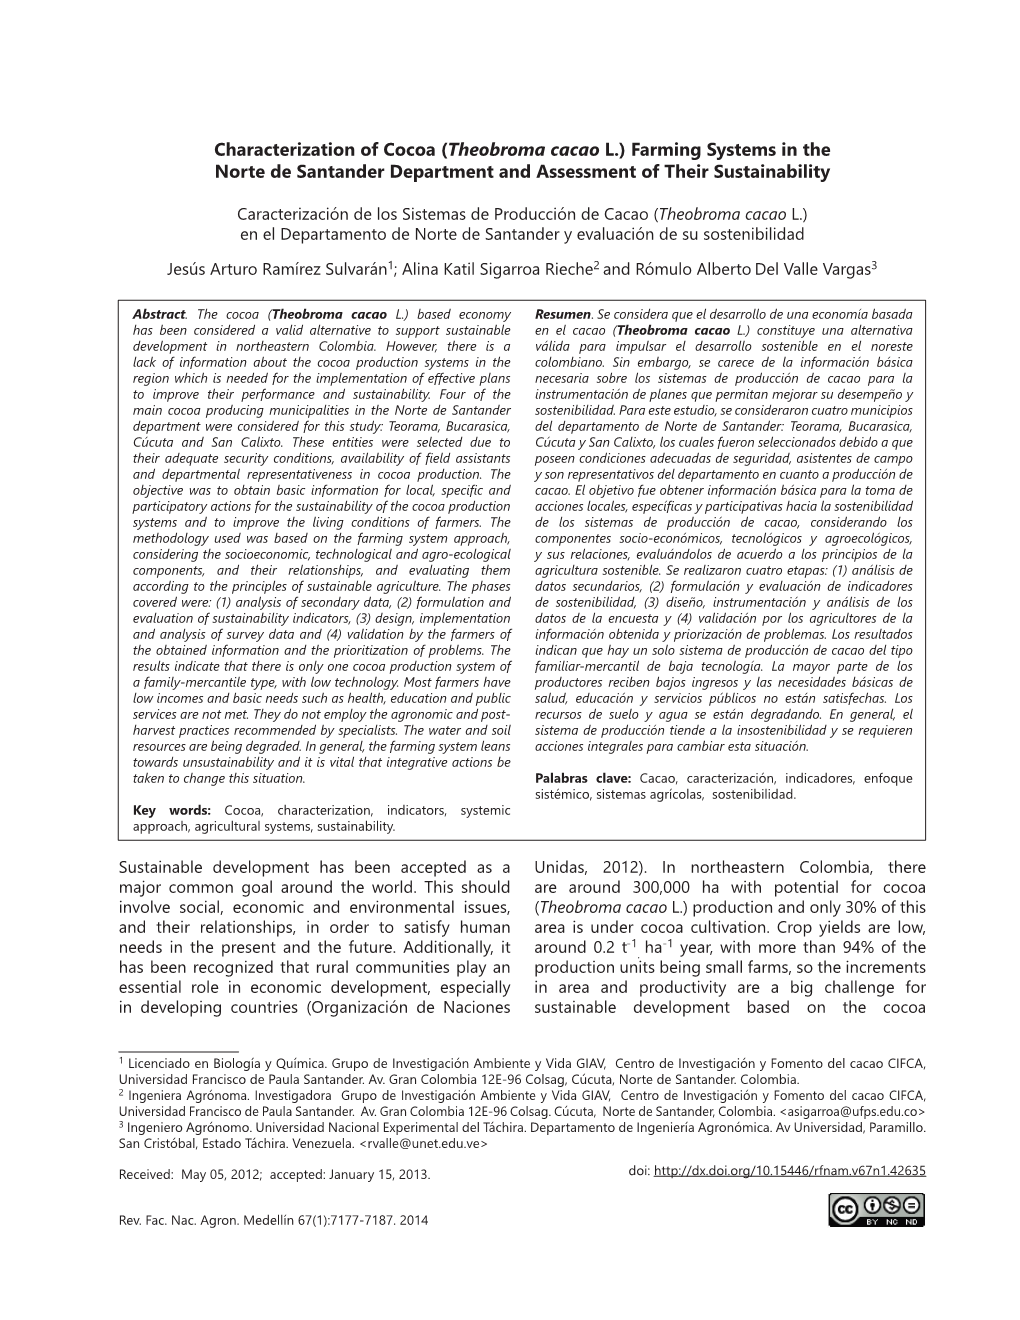 Characterization of Cocoa (Theobroma Cacao L.) Farming Systems in the Norte De Santander Department and Assessment of Their Sustainability